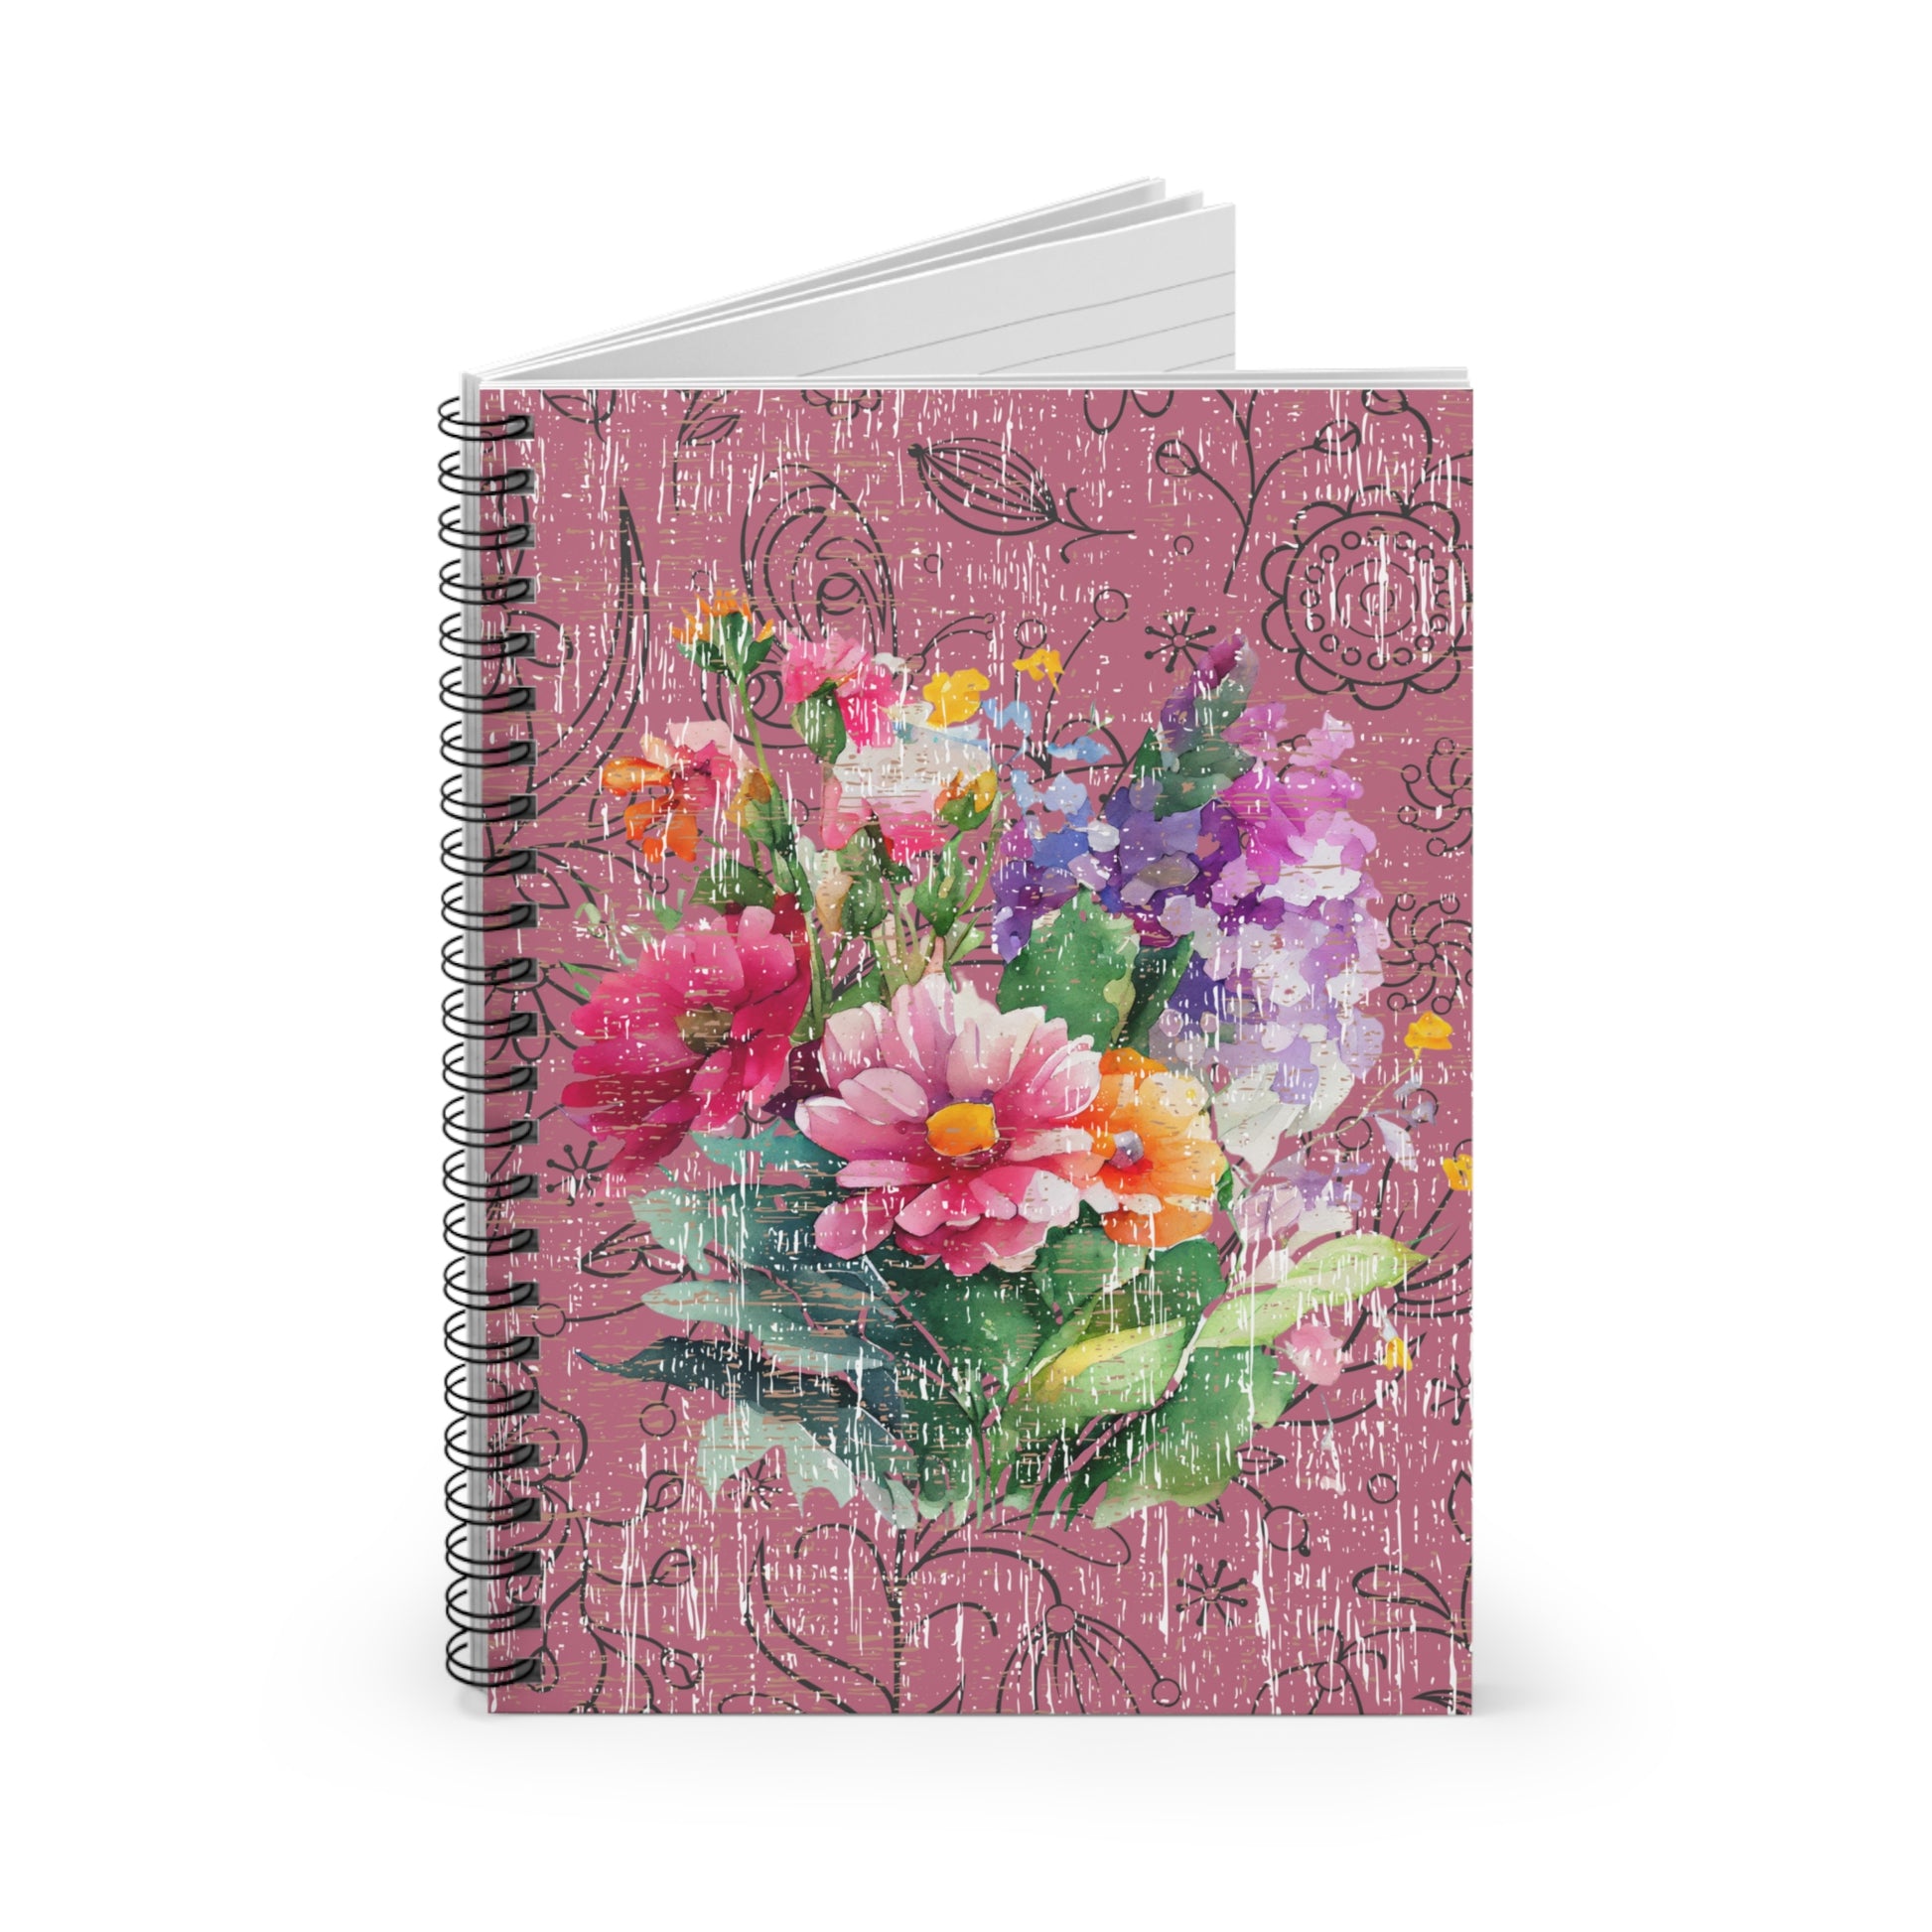 Rose-Colored Vintage Bliss: Floral Spiral Notebook for Elegant Writing and Creative Inspiration - Eddy and Rita